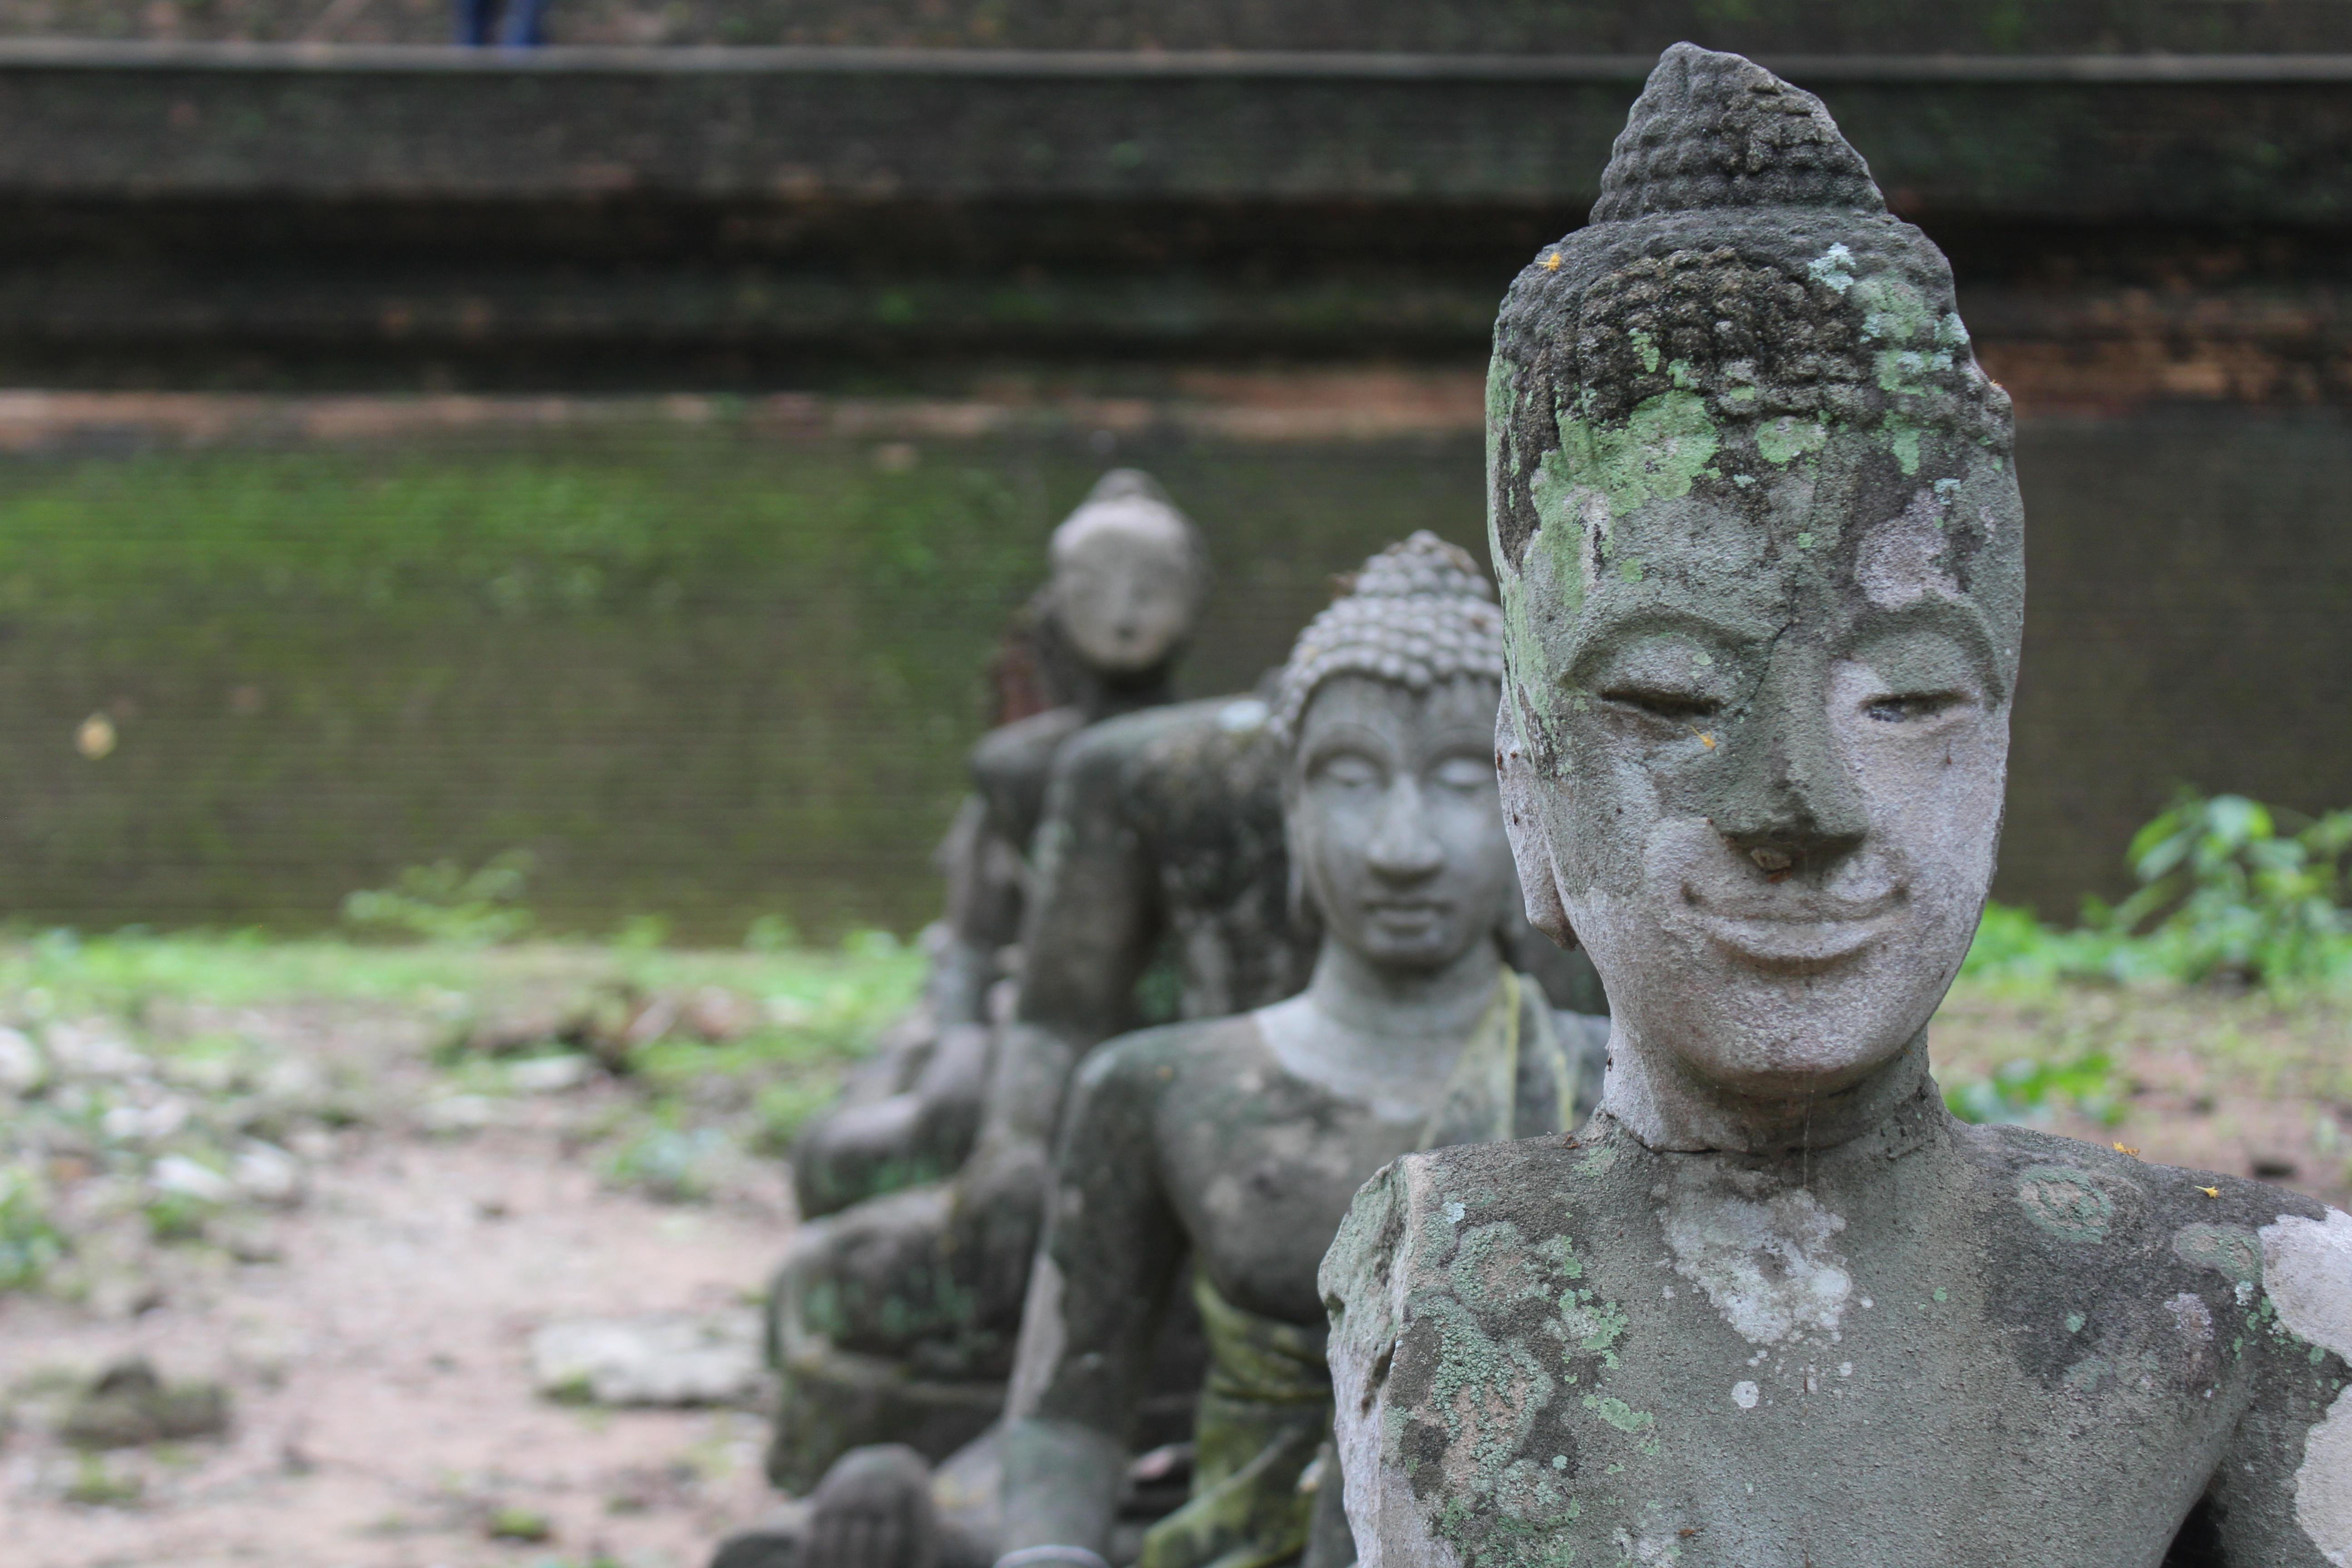 Stone buddhas spread across the grounds of Wat Umong.